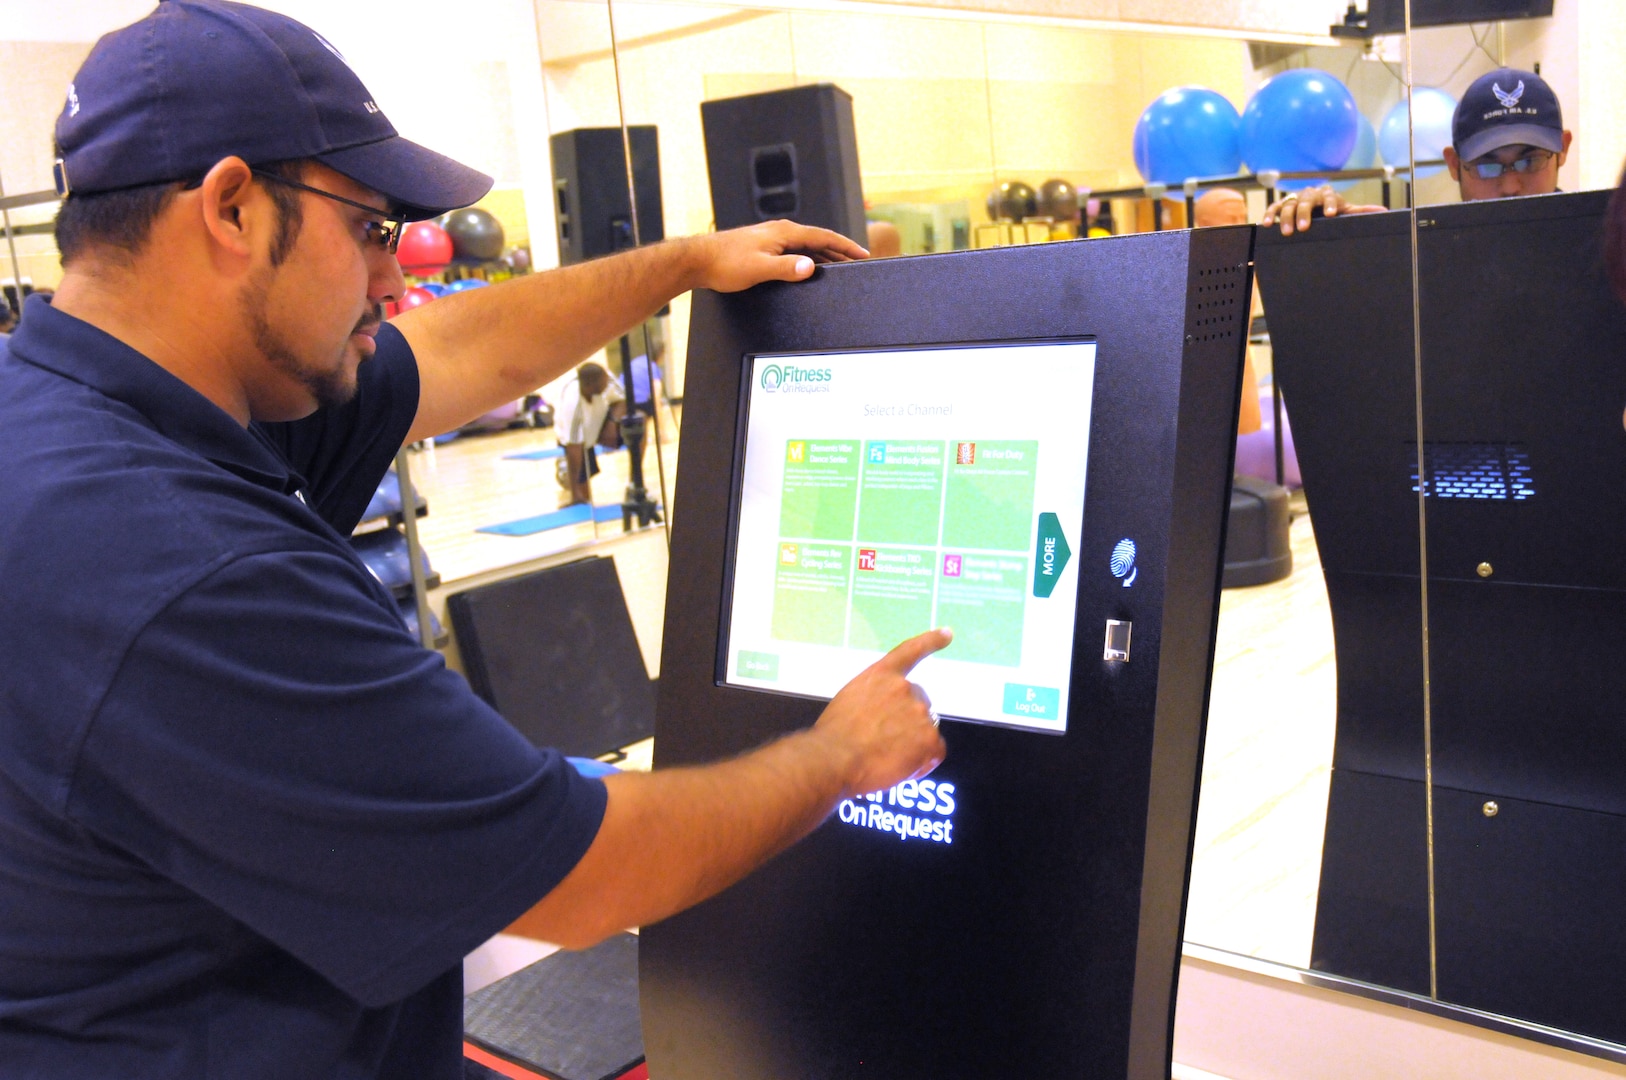 Rey Salinas, 902nd Force Support Squadron Rambler Fitness Center programs manager, demonstrates how to use the new Fitness on Request kiosk in the Rambler Fitness Center at Joint Base San Antonio-Randolph June 12, 2013. (U.S. Air Force Photo by A1C Alexandria Slade/ Released)